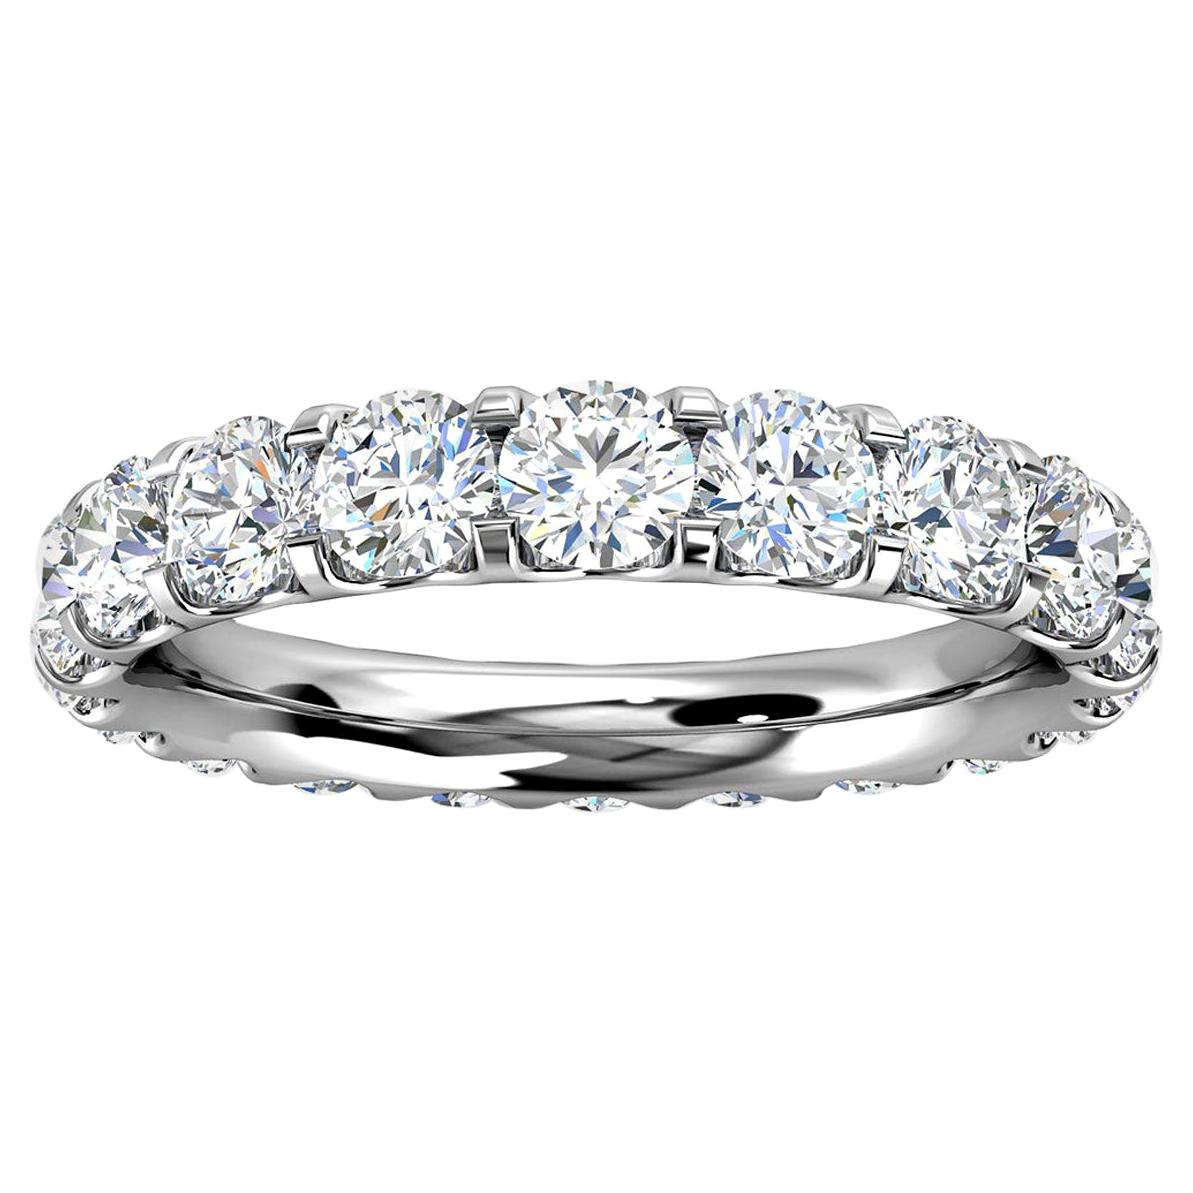 For Sale:  14k White Gold Viola Eternity Micro-Prong Diamond Ring '2 Ct. Tw'